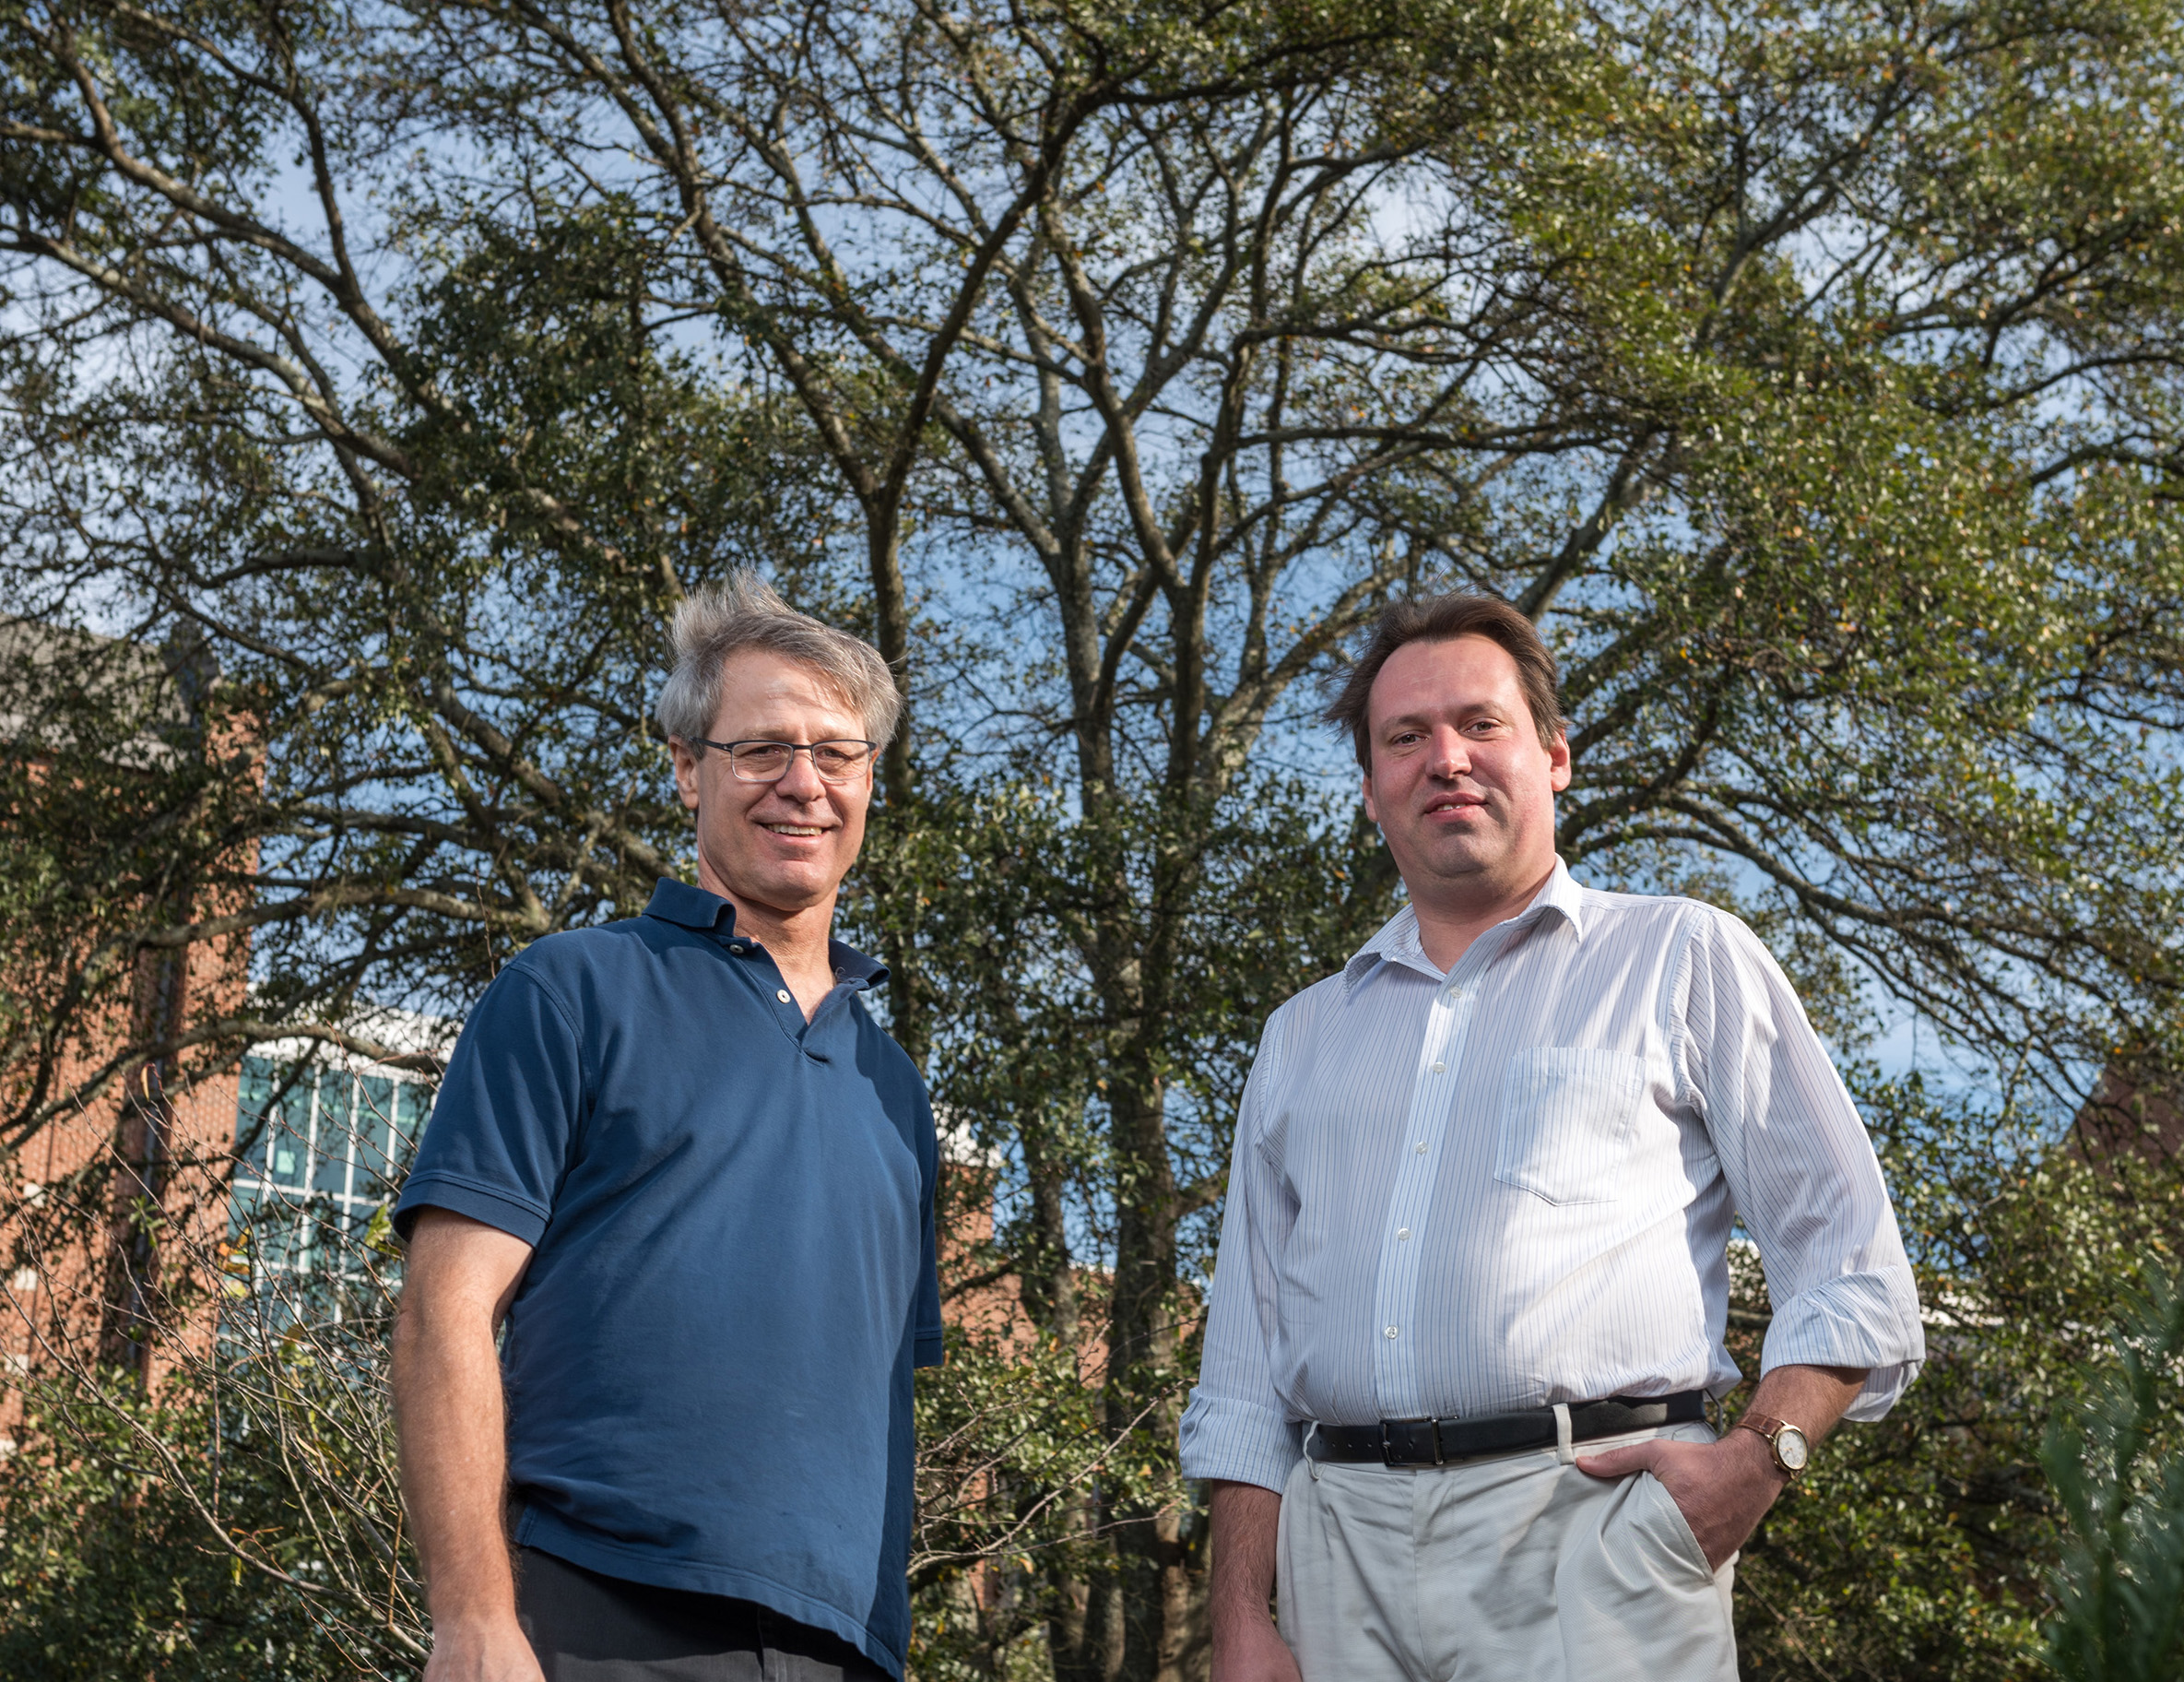 Image shows Georgia Tech Professor Loren Williams (left) and Research Scientist Anton Petrov in front of a large tree that symbolizes the growth and accretion of the ribosome over time. (Credit: Rob Felt, Georgia Tech)